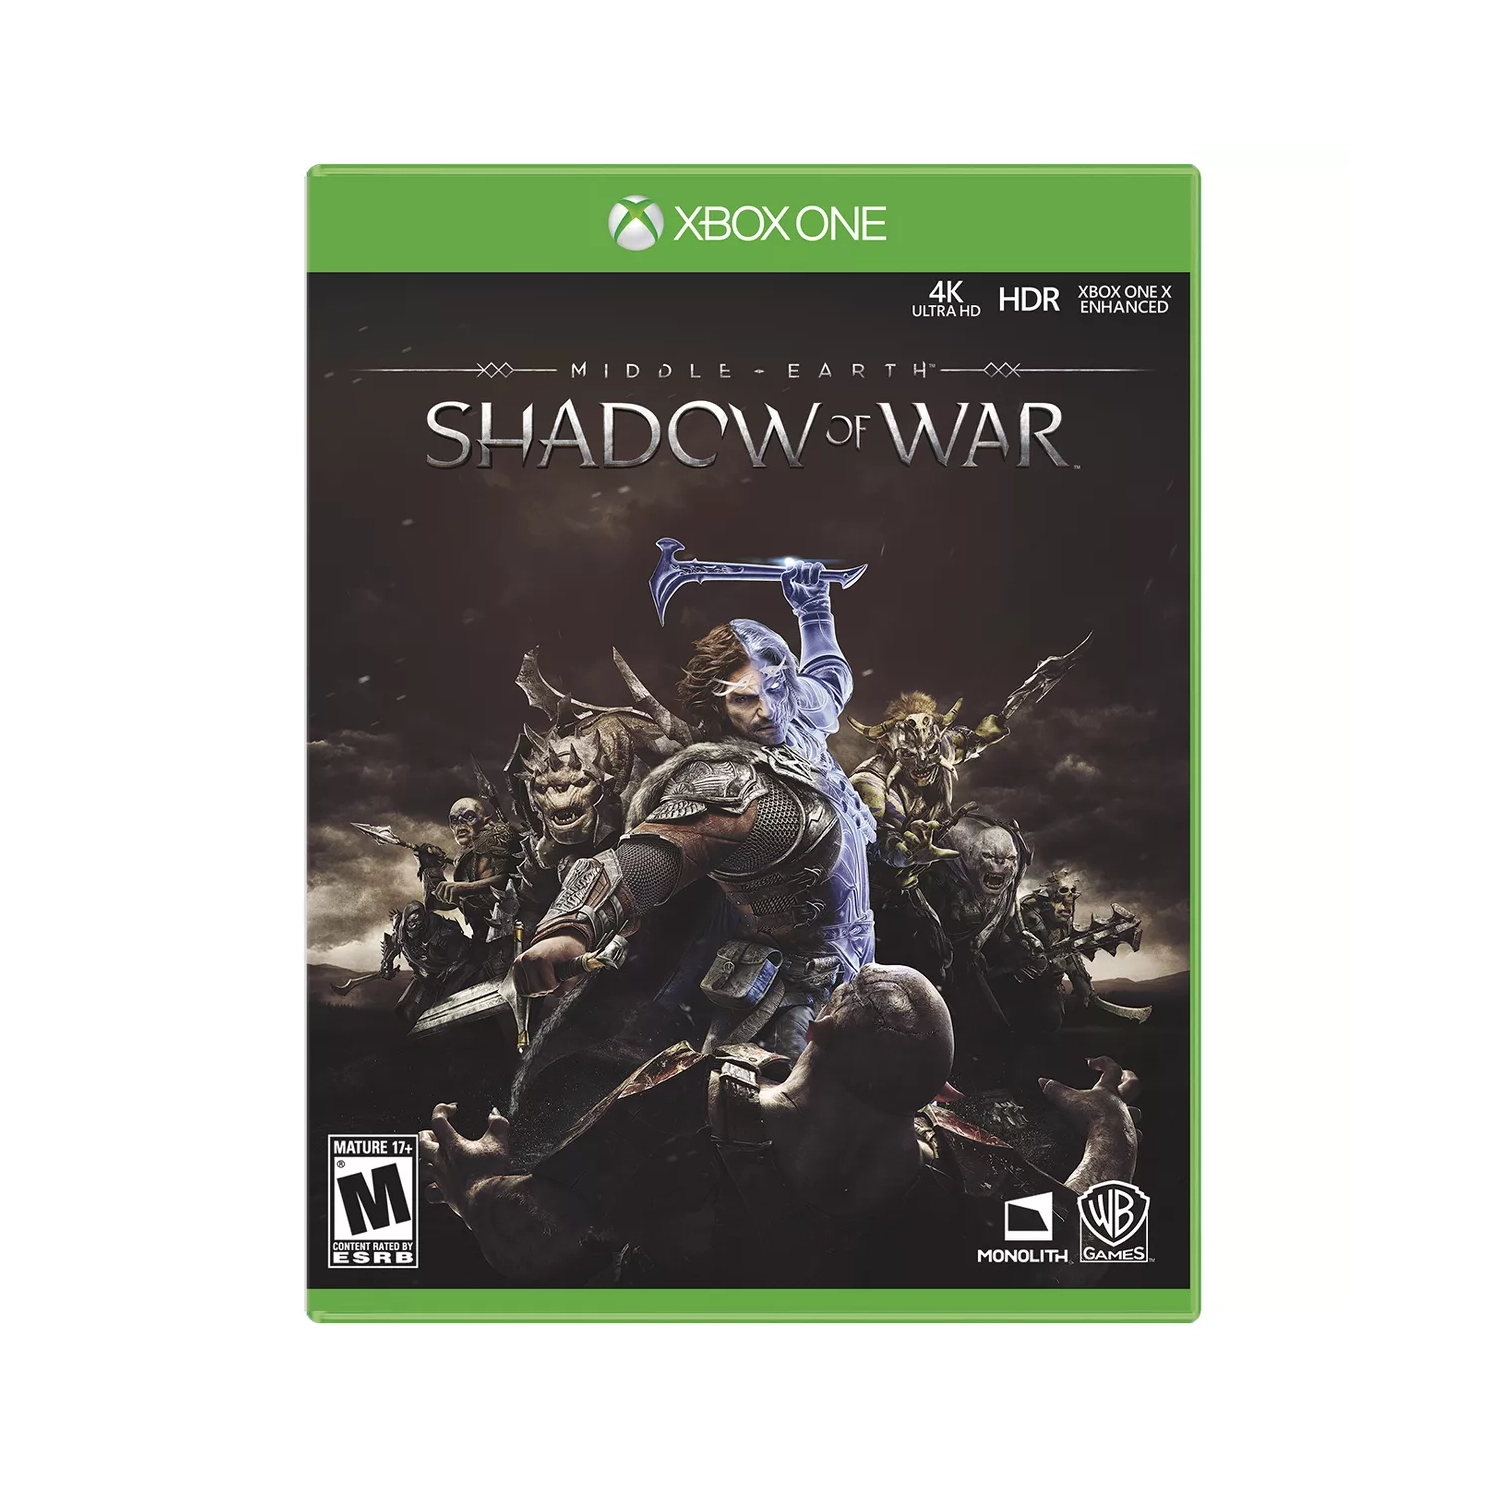 Middle-Earth: Shadow of War for Xbox One [VIDEOGAMES]